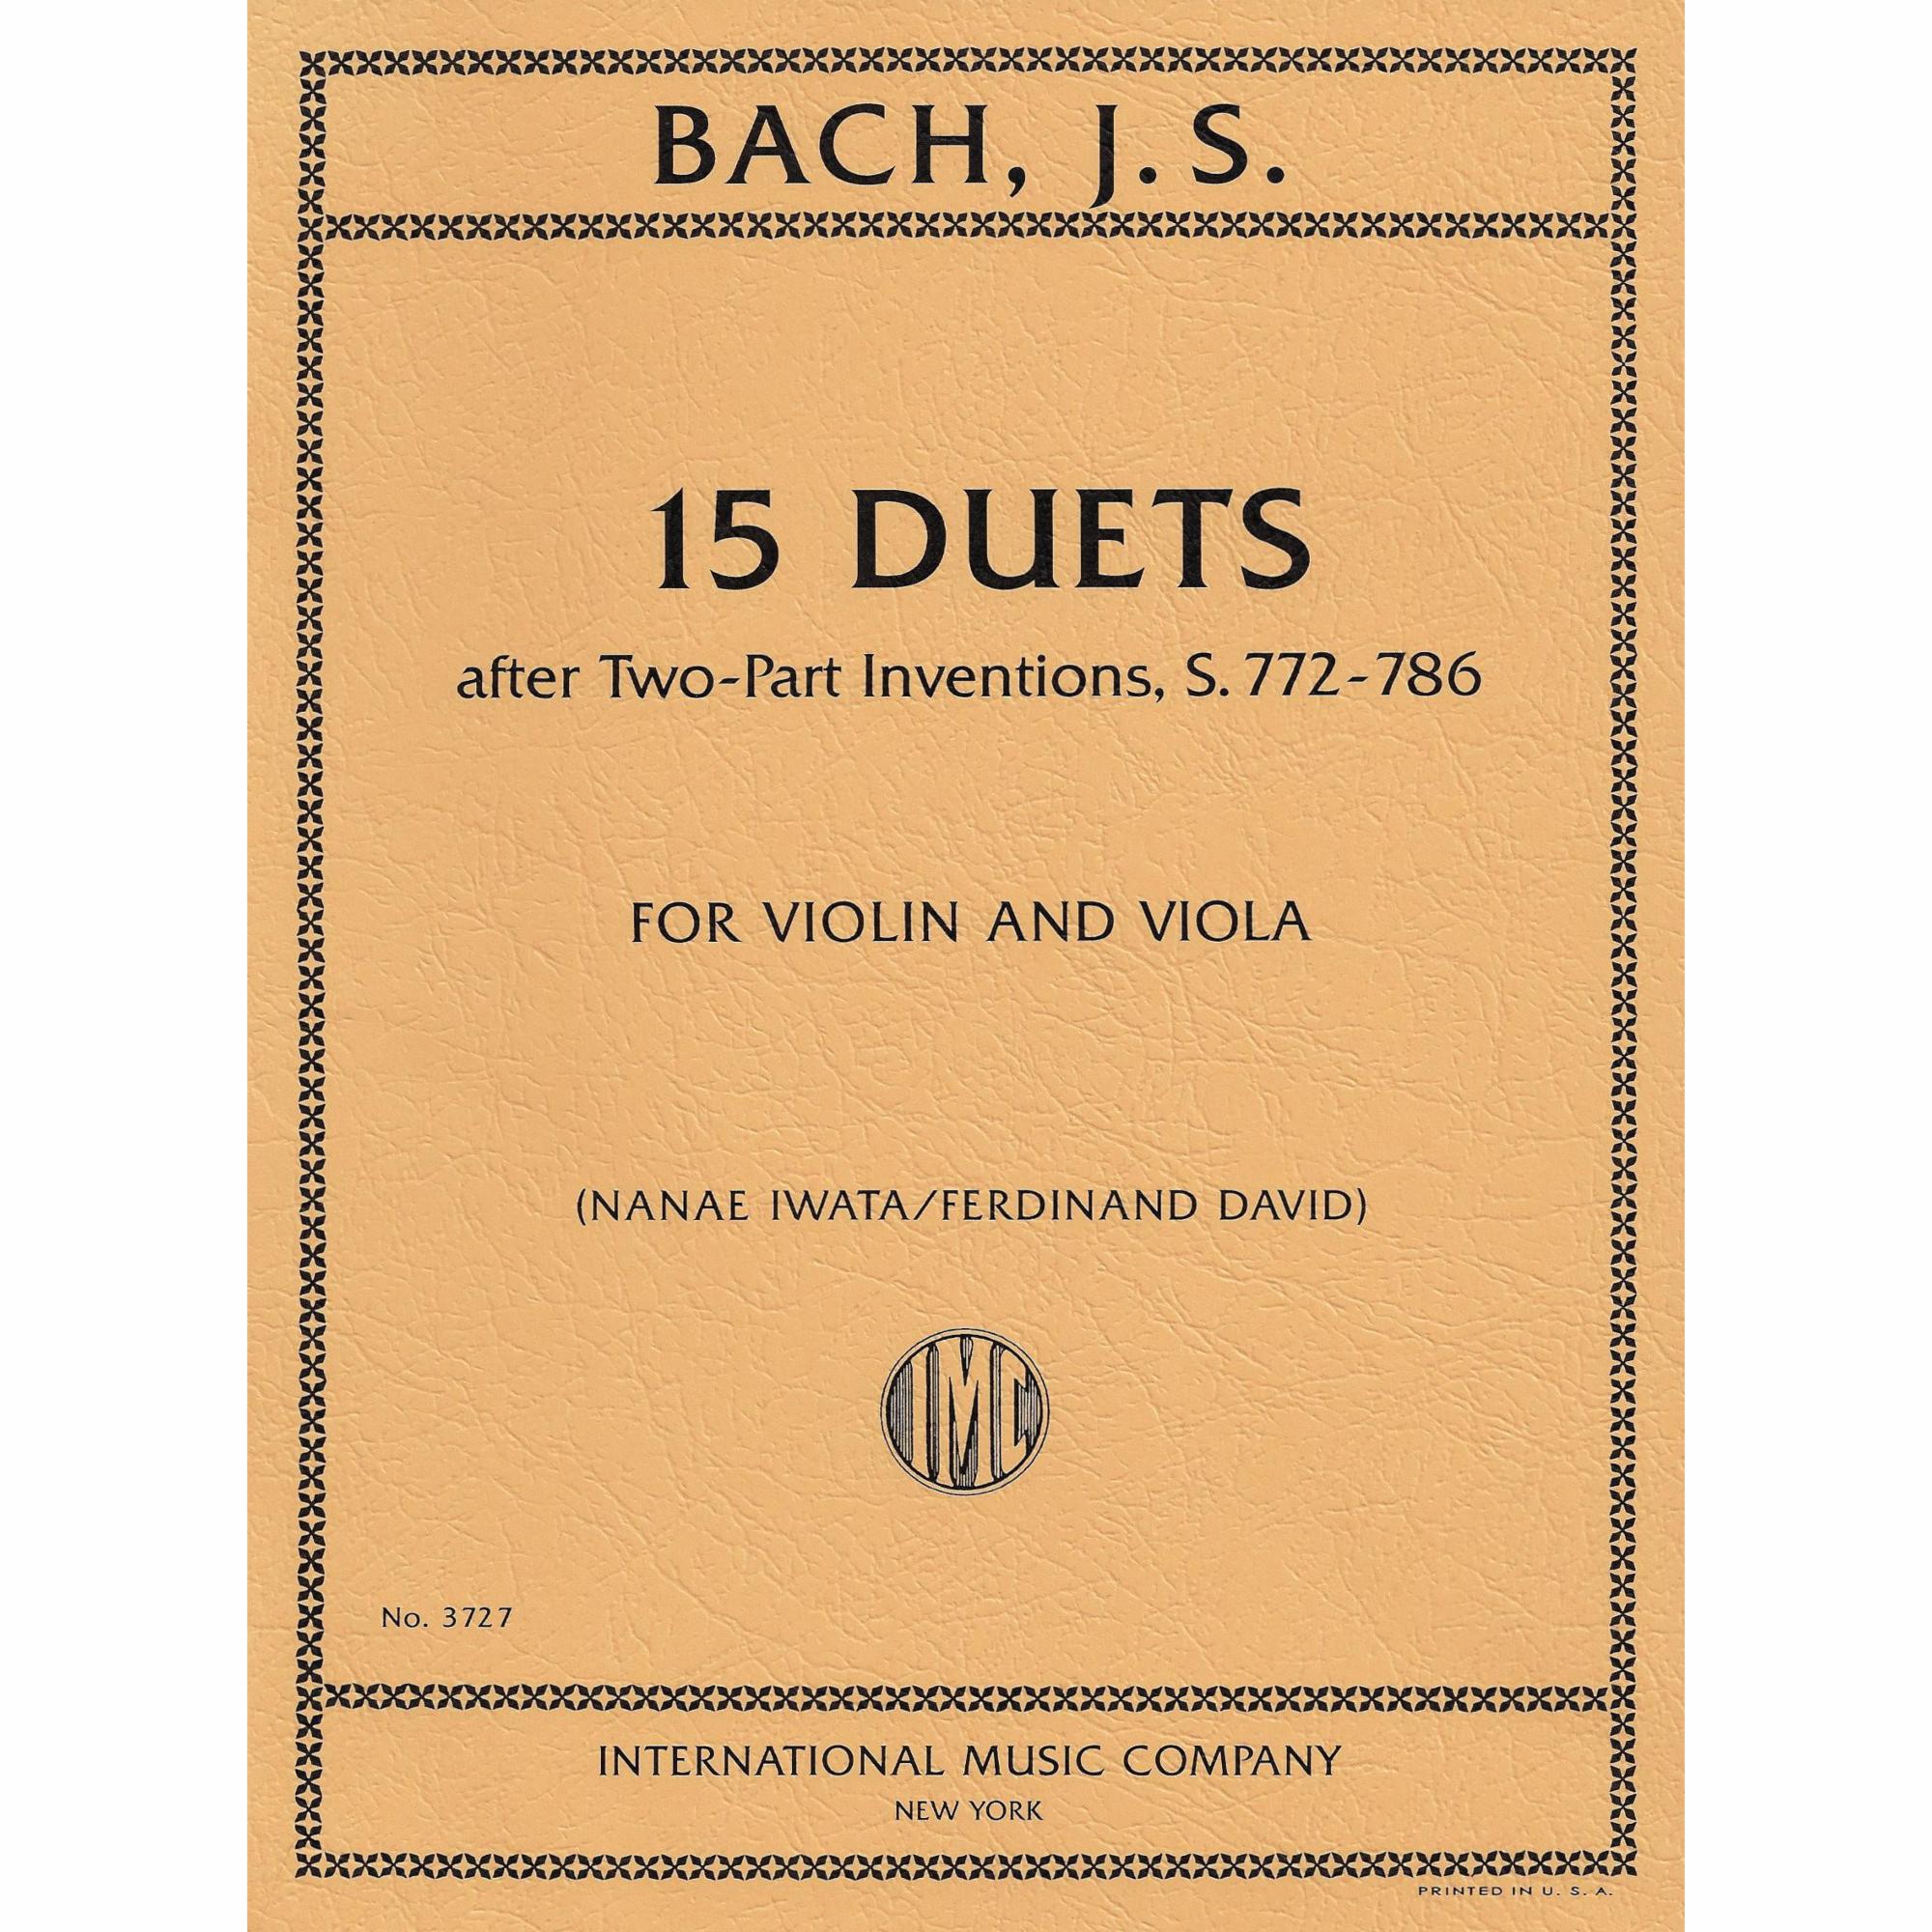 Bach -- 15 Duets, S. 772-786 for Violin and Viola